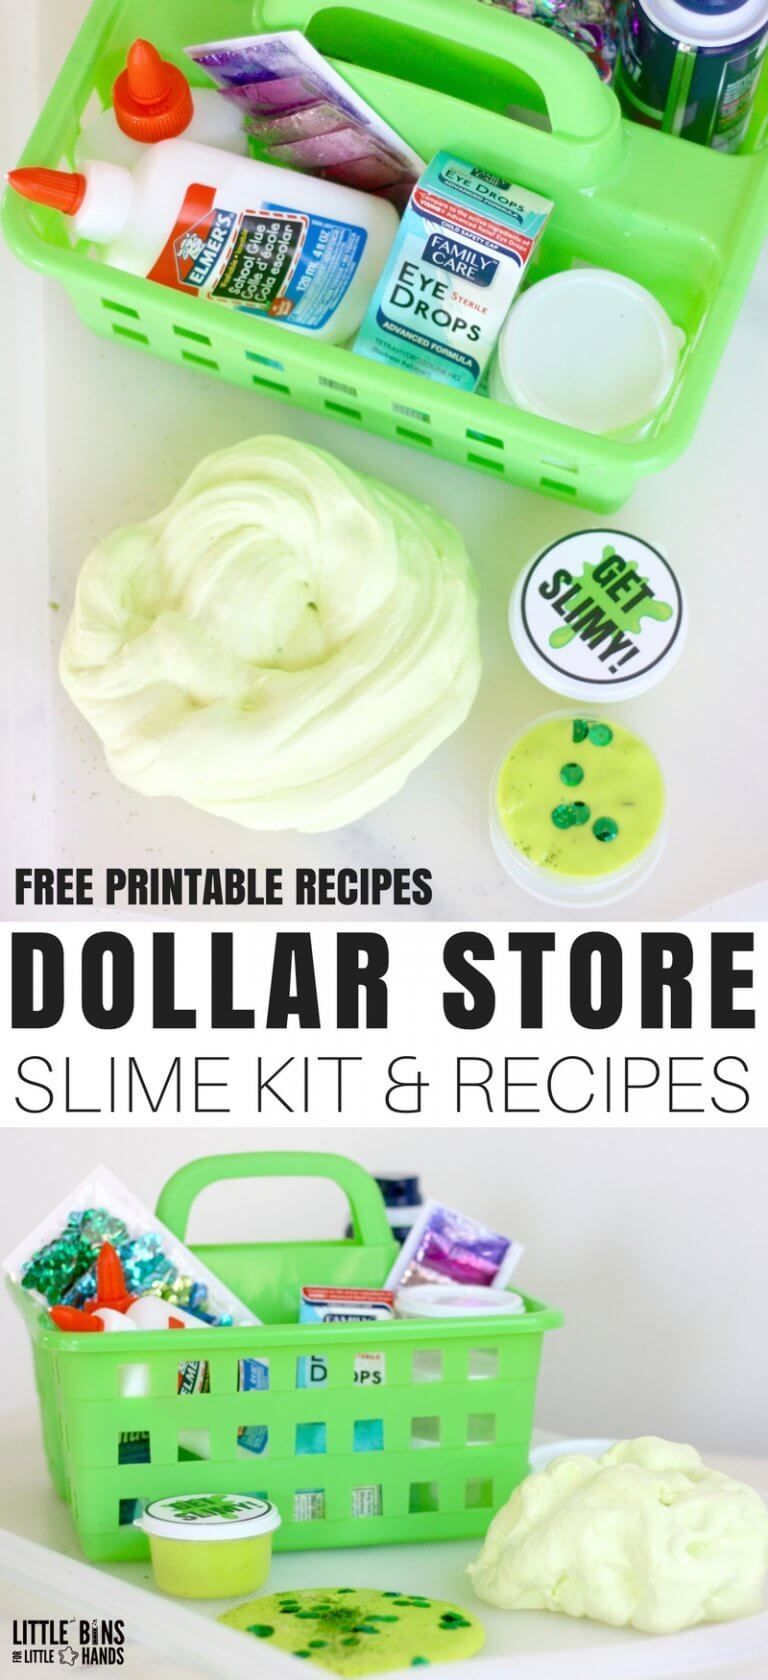 Dollar Store Slime Recipes and DIY Homemade Slime Kit! - Dollar Store Slime Recipes and DIY Homemade Slime Kit! -   17 diy Slime kit ideas